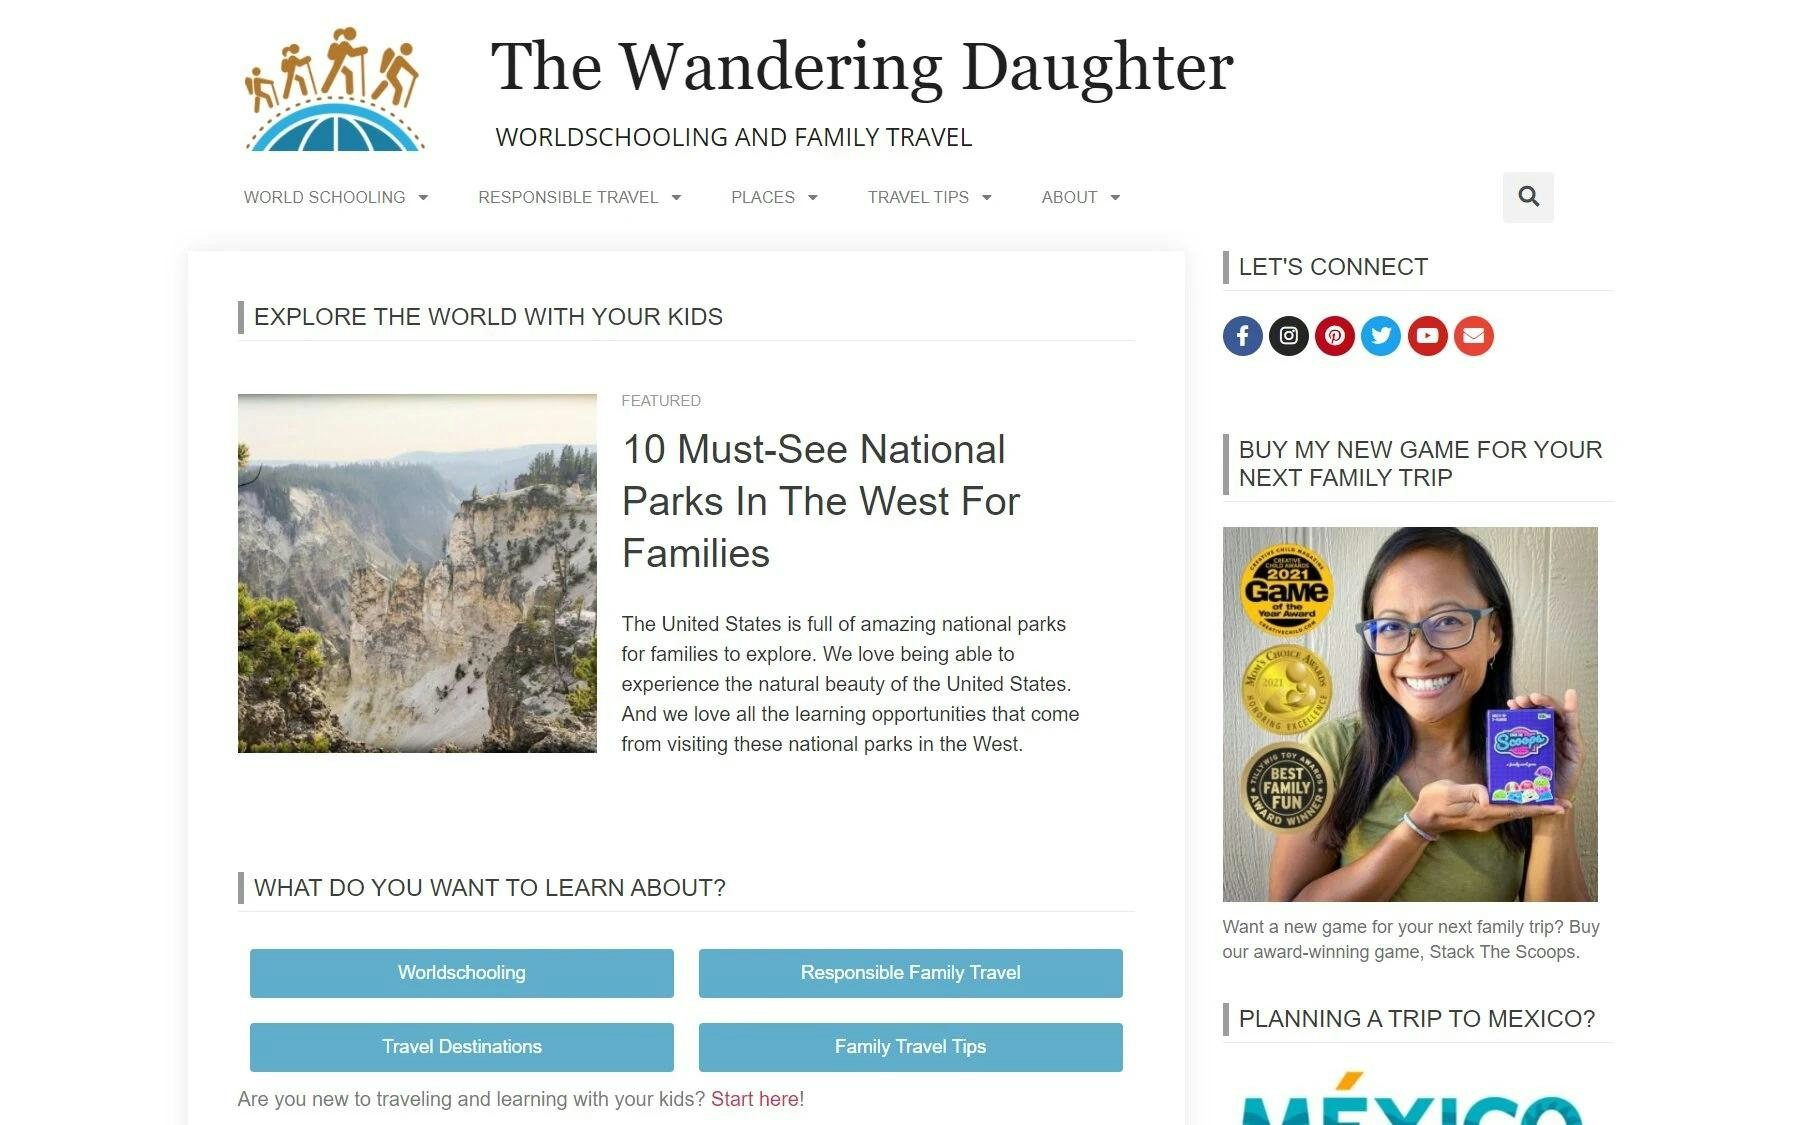 The Wandering Daughter